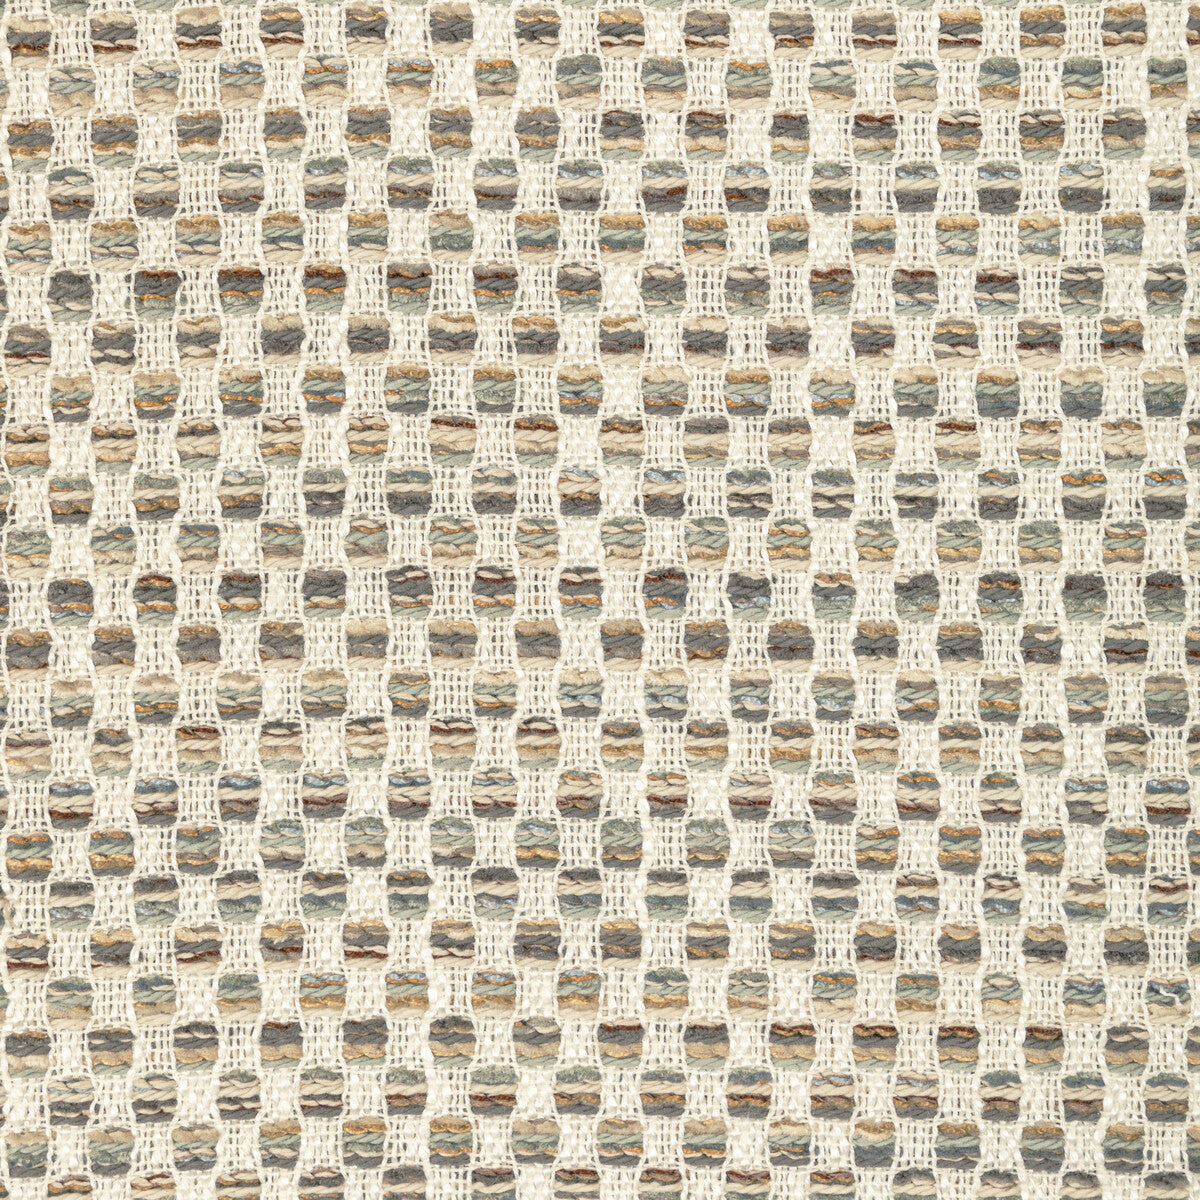 Kravet Design fabric in 36410-1311 color - pattern 36410.1311.0 - by Kravet Design in the Performance Crypton Home collection